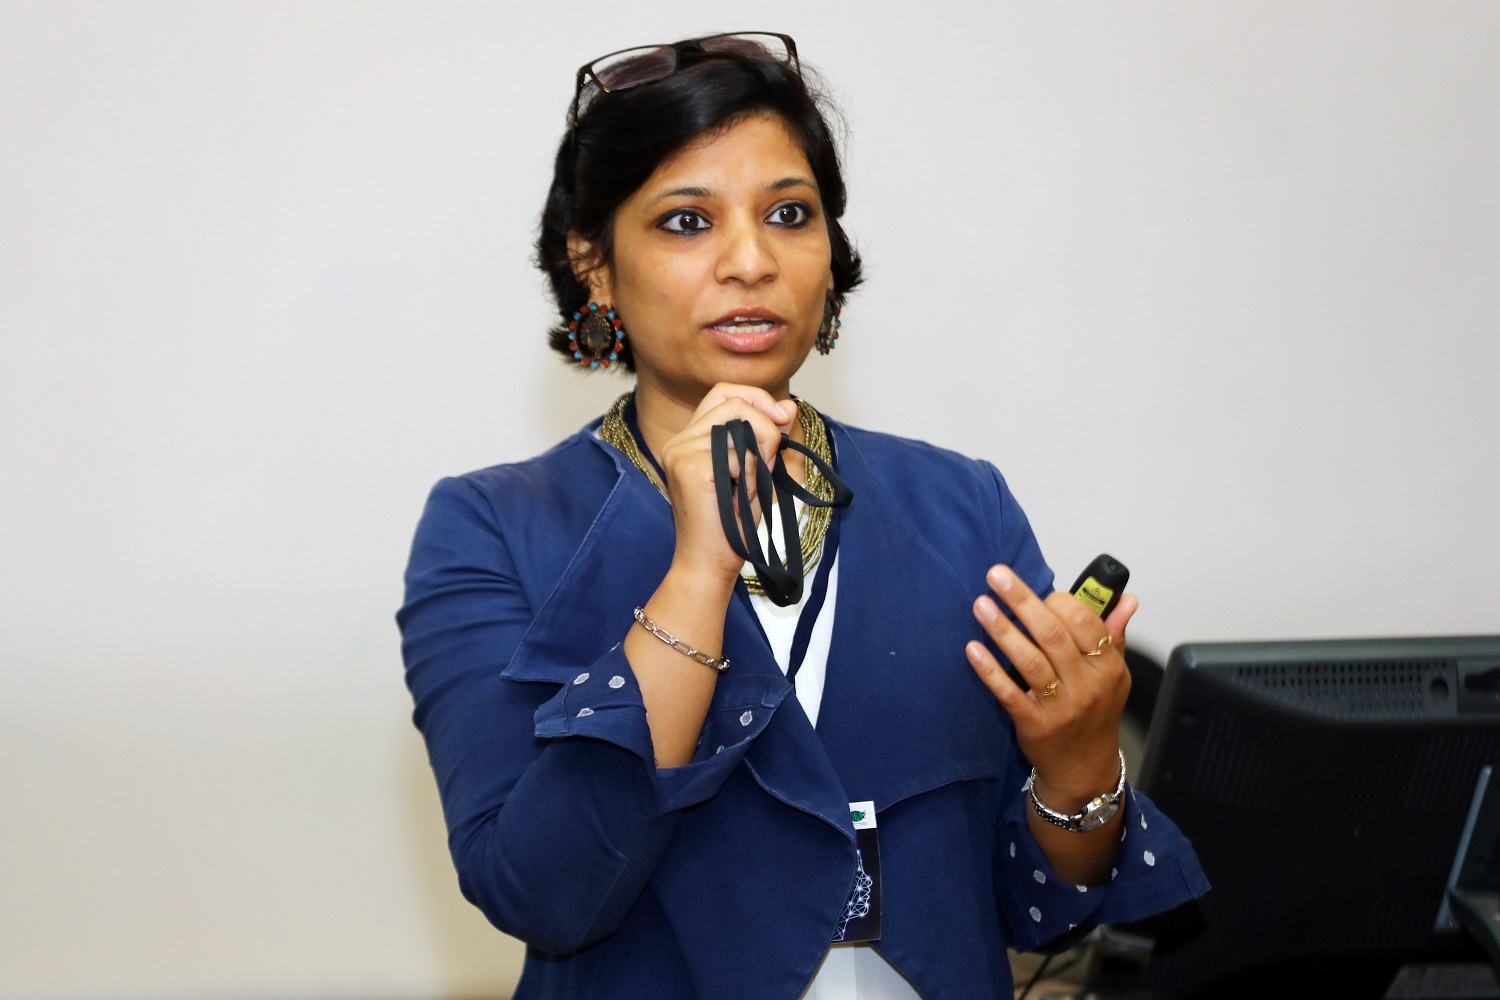 Mamta Aggarwal Rajnayak, VP - Head of AI-ML Products & Platforms@AI Labs, American Express, spoke on 'Role of AI Products in ML Model Governance' at WiDS Bengaluru Conference.